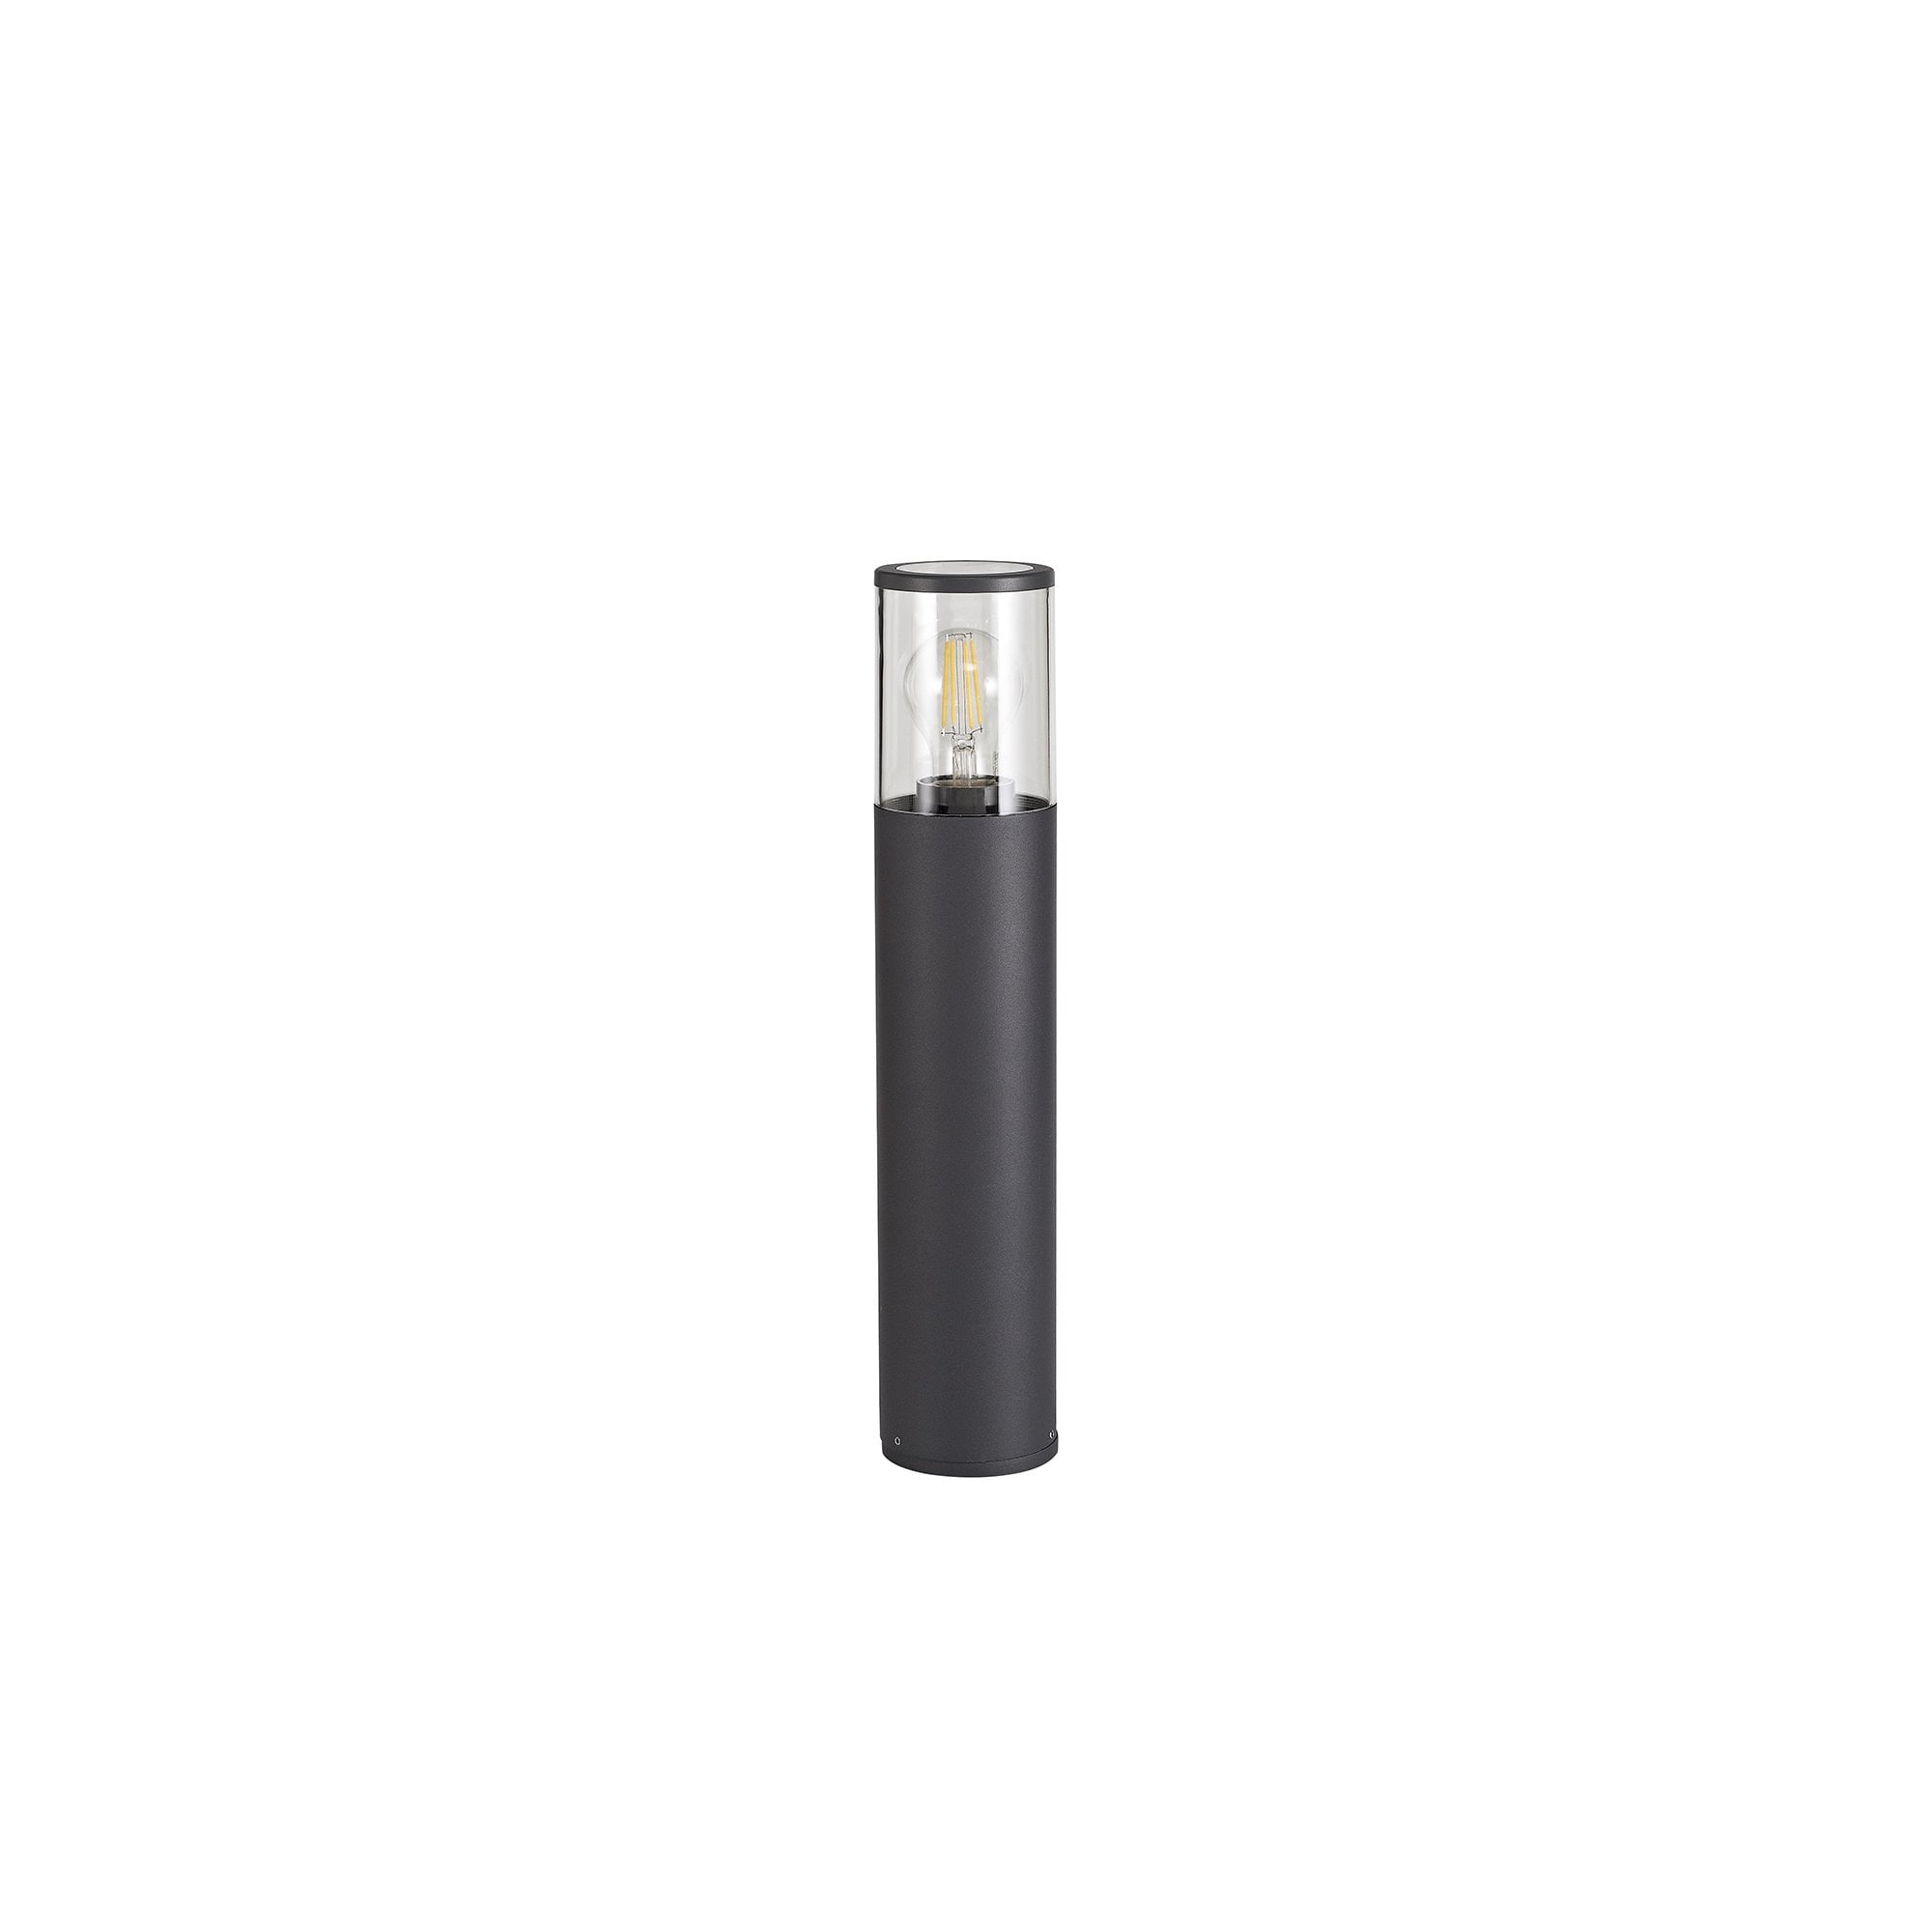 45cm Post Lamp 1 x E27, IP54, Anthracite/Clear, 2yrs Warranty